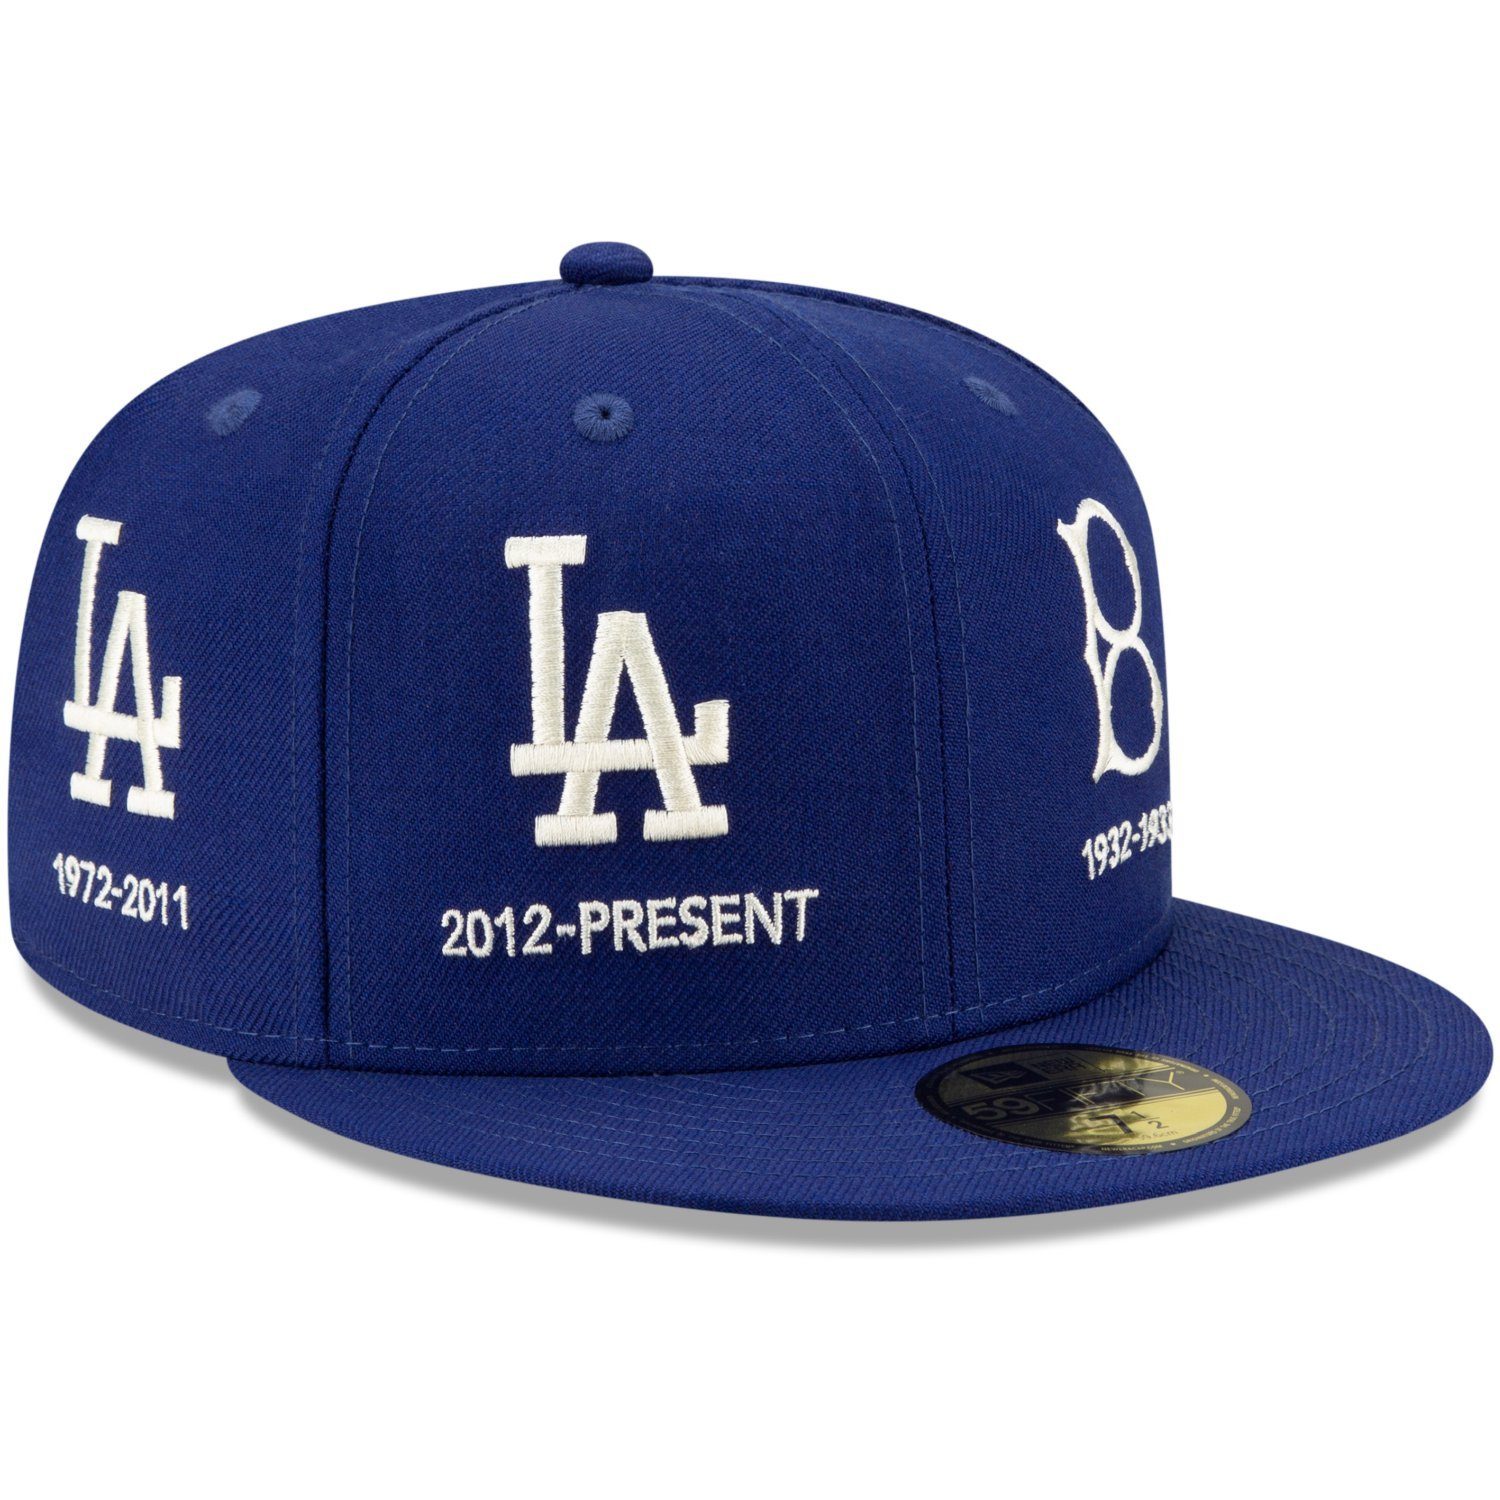 Los Fitted New 59Fifty Era COOPERSTOWN Cap Angeles Dodgers